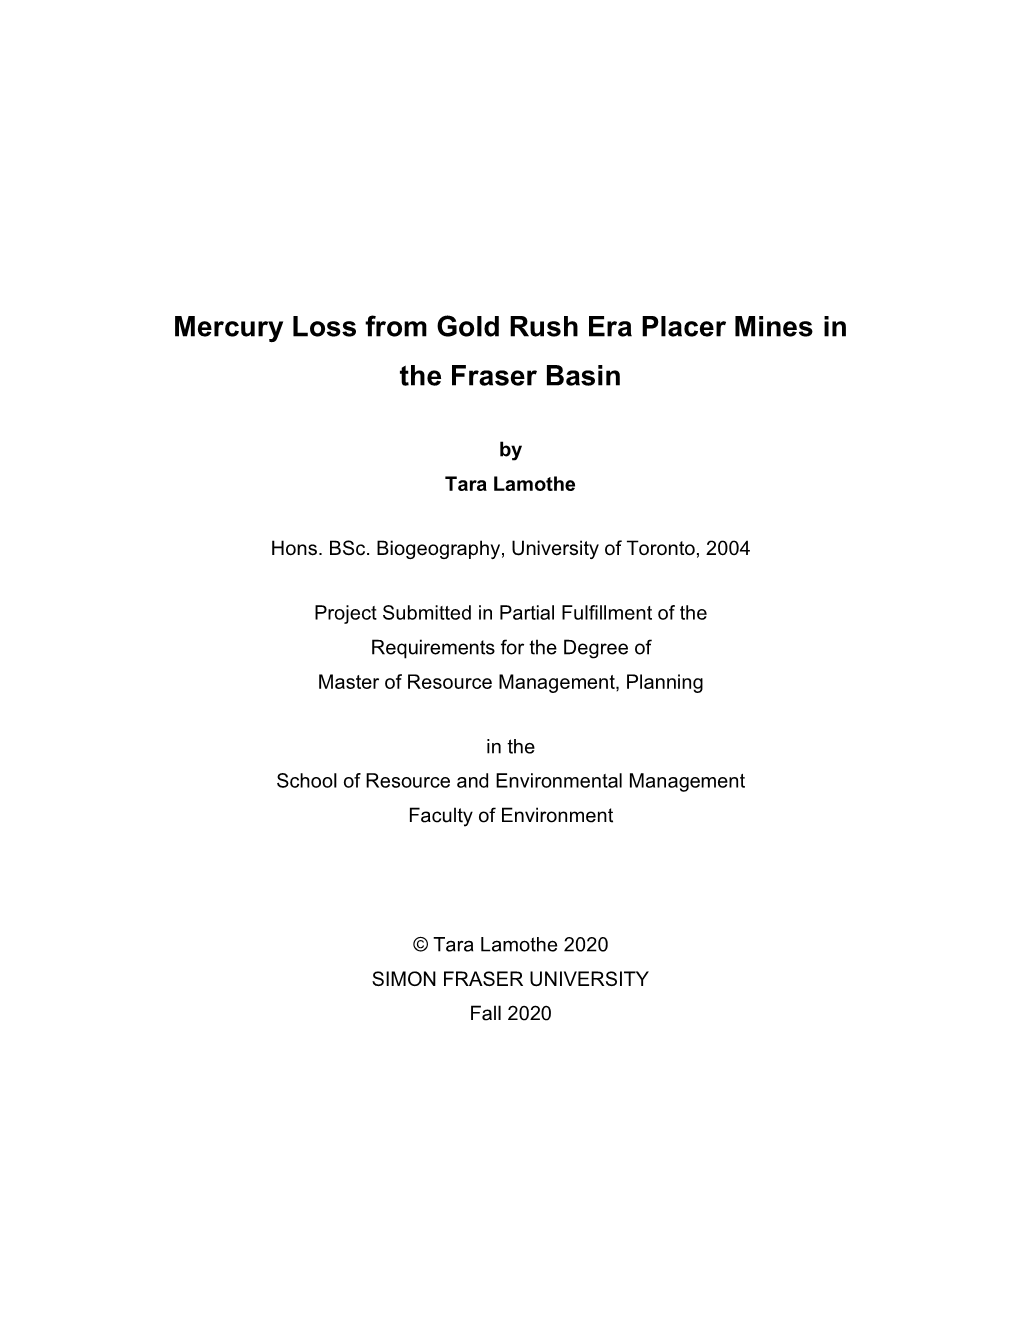 Mercury Loss from Gold Rush Era Placer Mines in the Fraser Basin